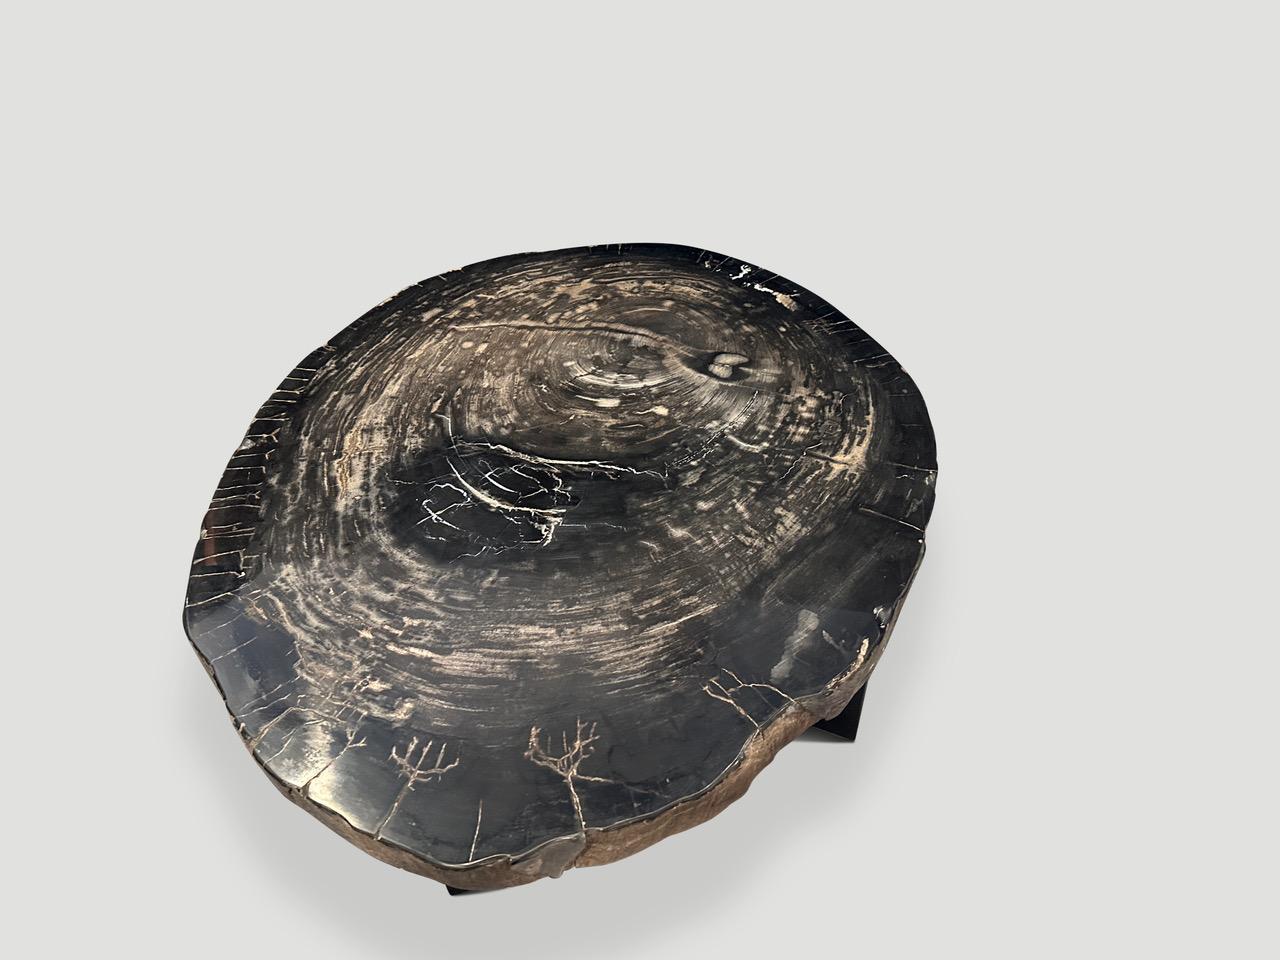 Stunning rare blue black tones on this petrified wood slab coffee table. This large impressive slab is floating on a minimalist metal base. Contrasting white markings and natural crystals are embedded on the top. We polished the top and left the